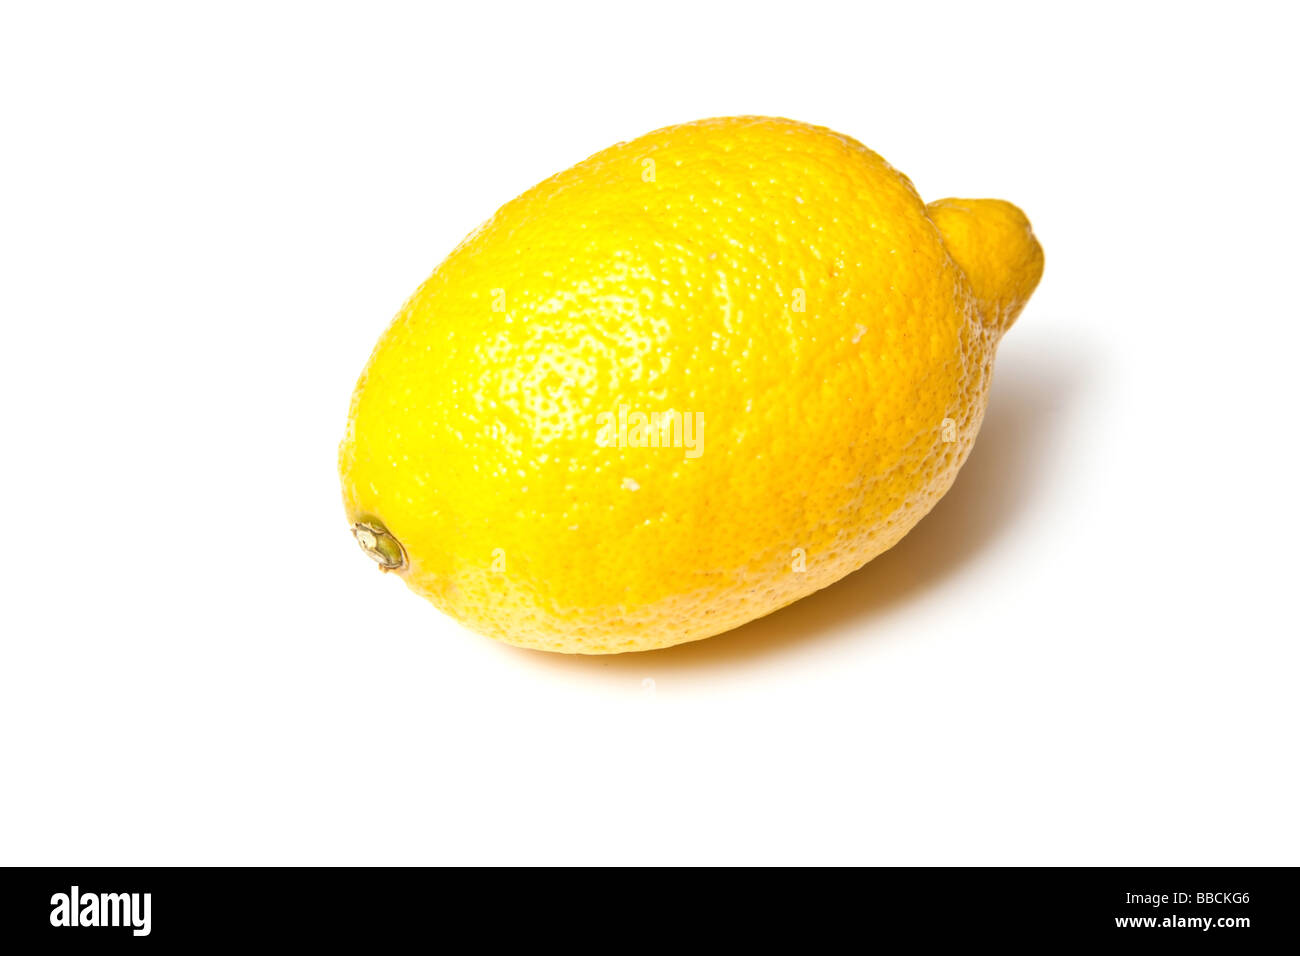 Lemon isolated on a white background studio Banque D'Images